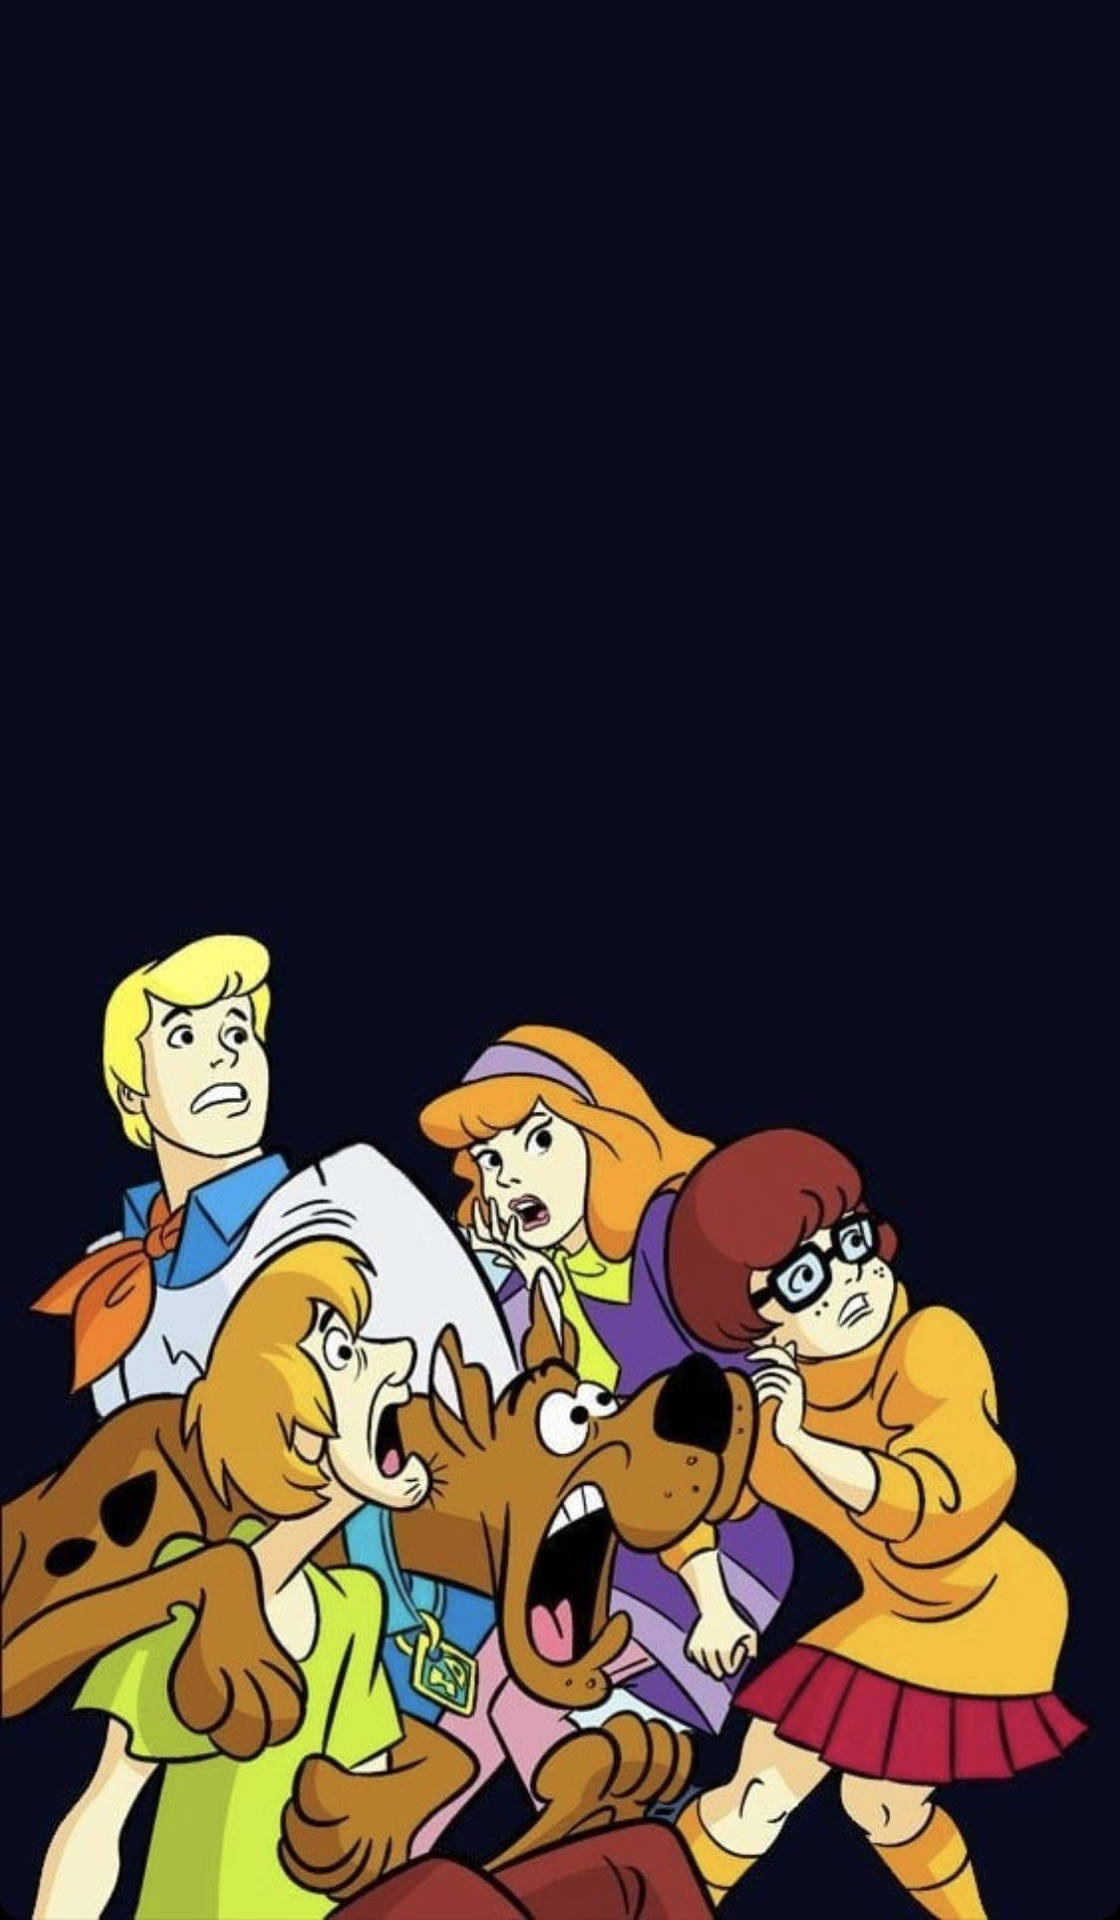 Energetic And Mystery-solving Scooby Doo Poster Background